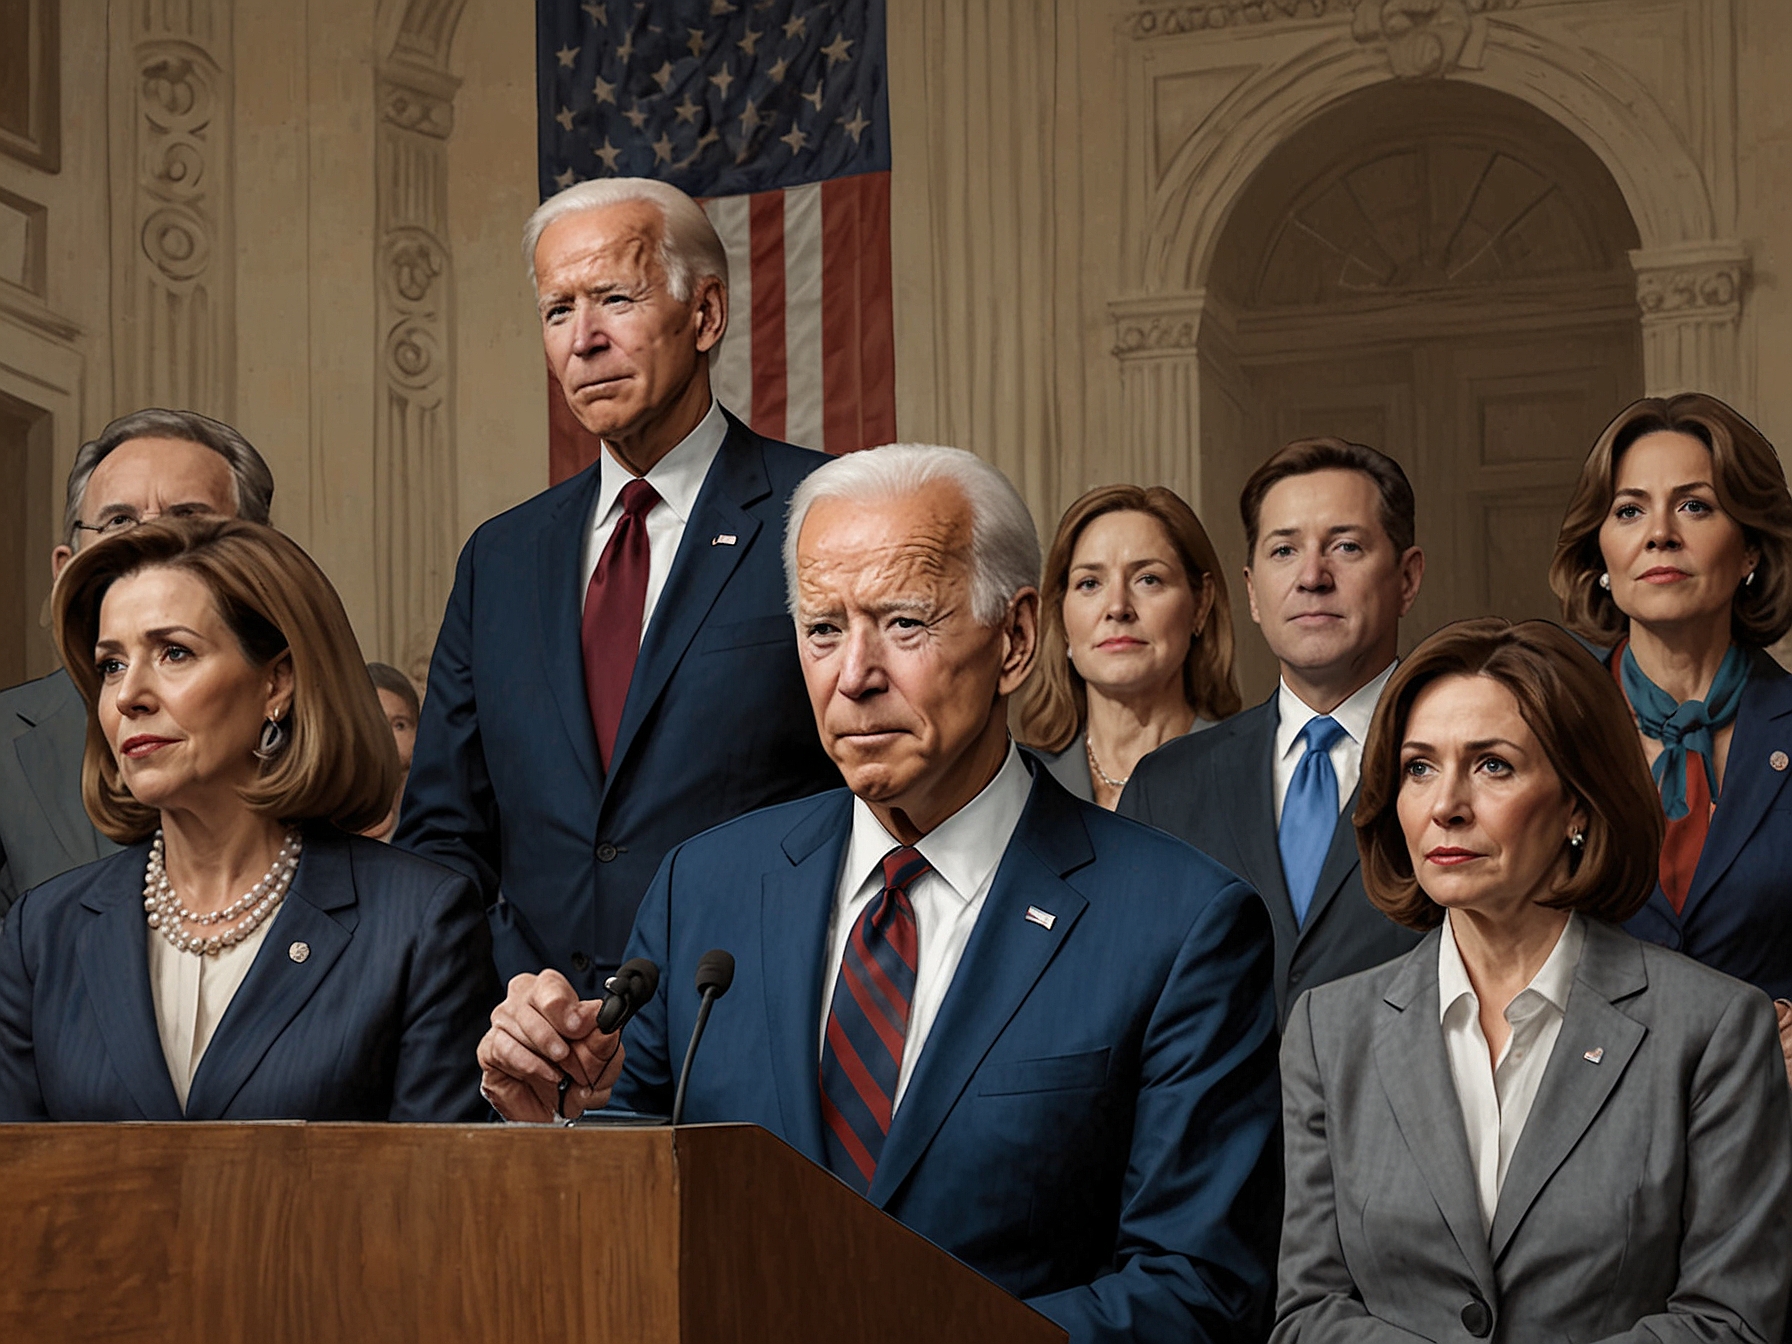 Democratic lawmakers express solidarity, focusing on unity and supporting President Biden’s ongoing efforts to address key national issues.